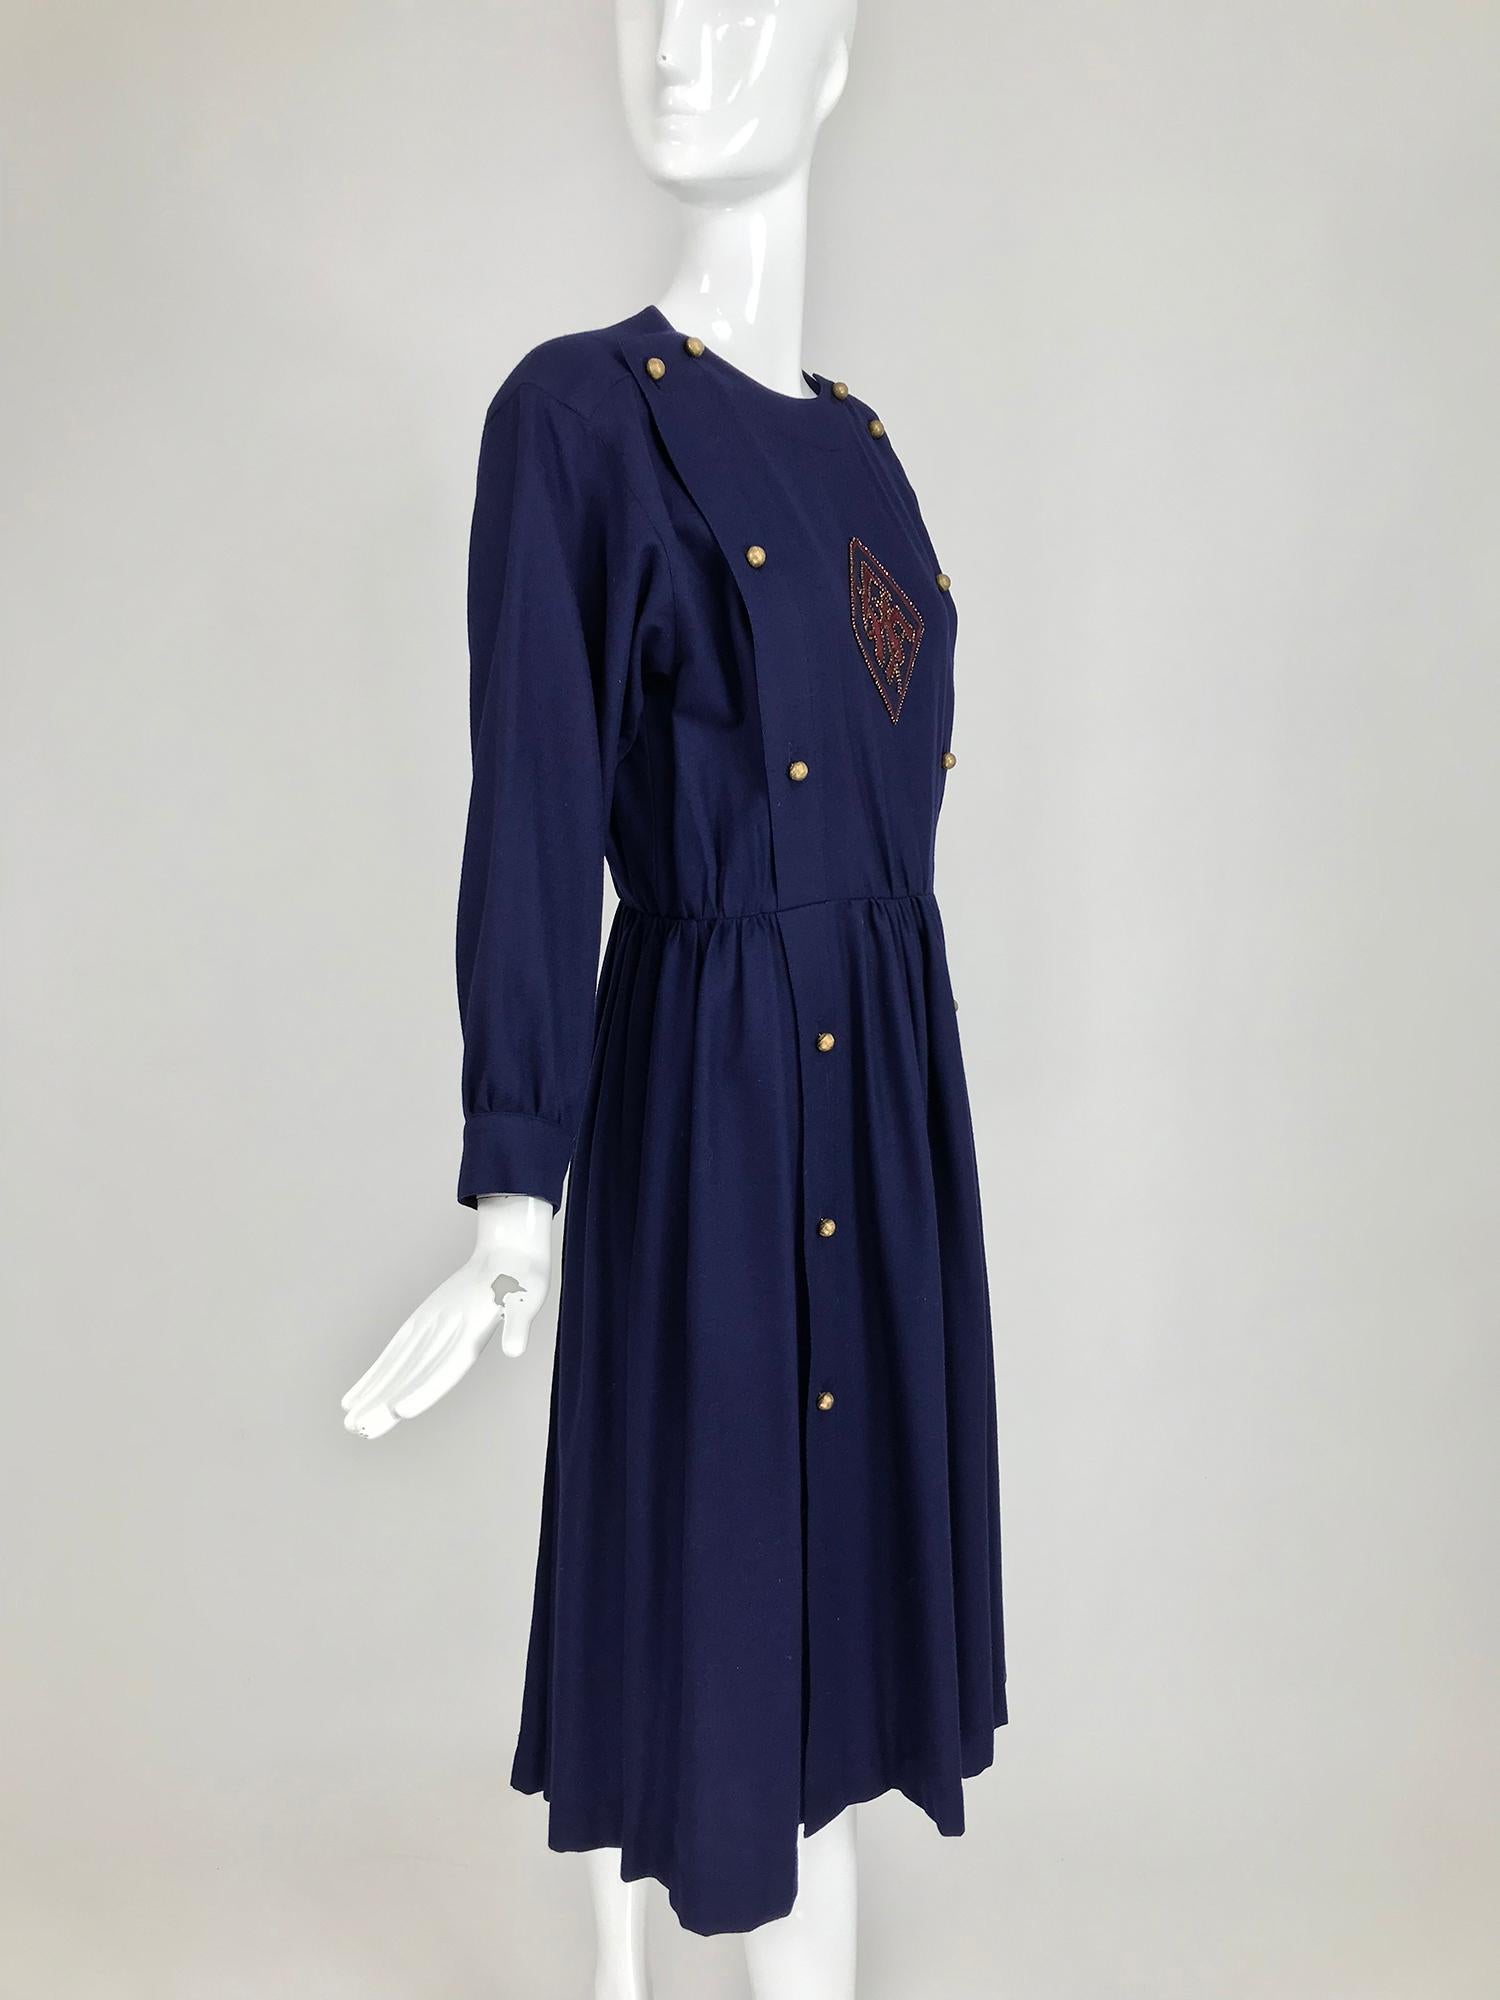 Chloe 1981 Karl Lagerfeld Blue Embroidered Button Front Dress Documented 10